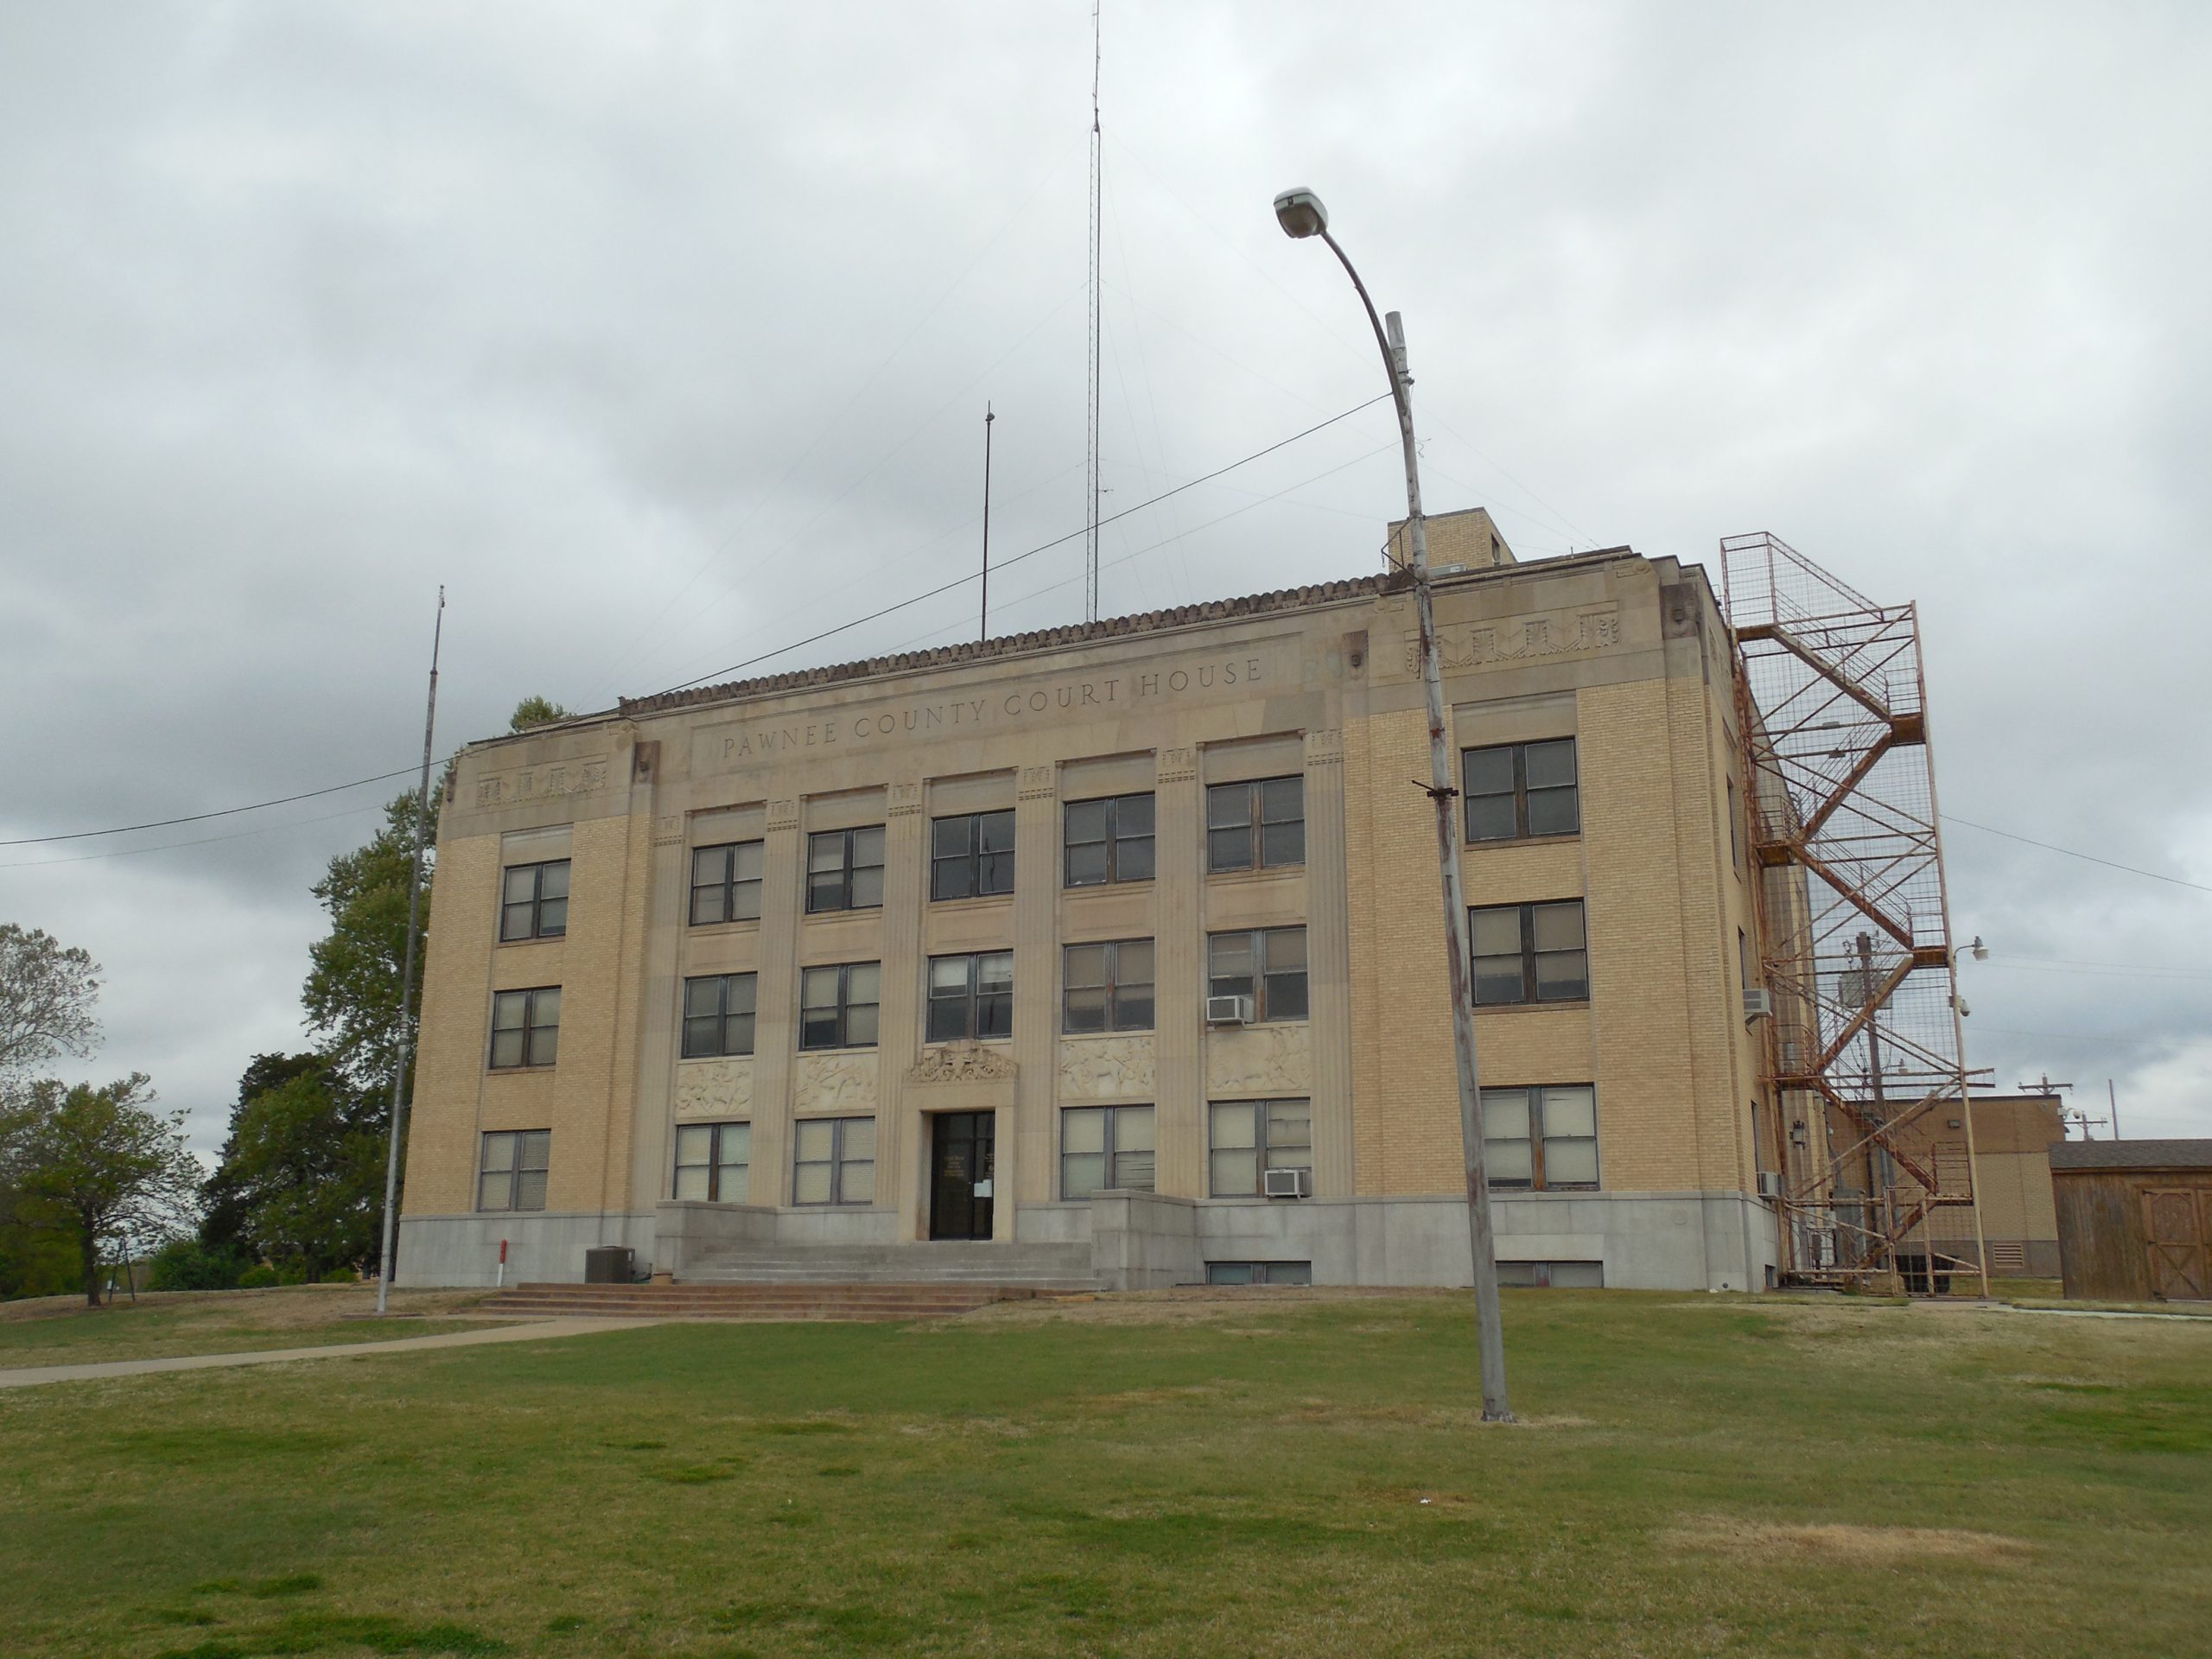 Pawnee County Courthouse